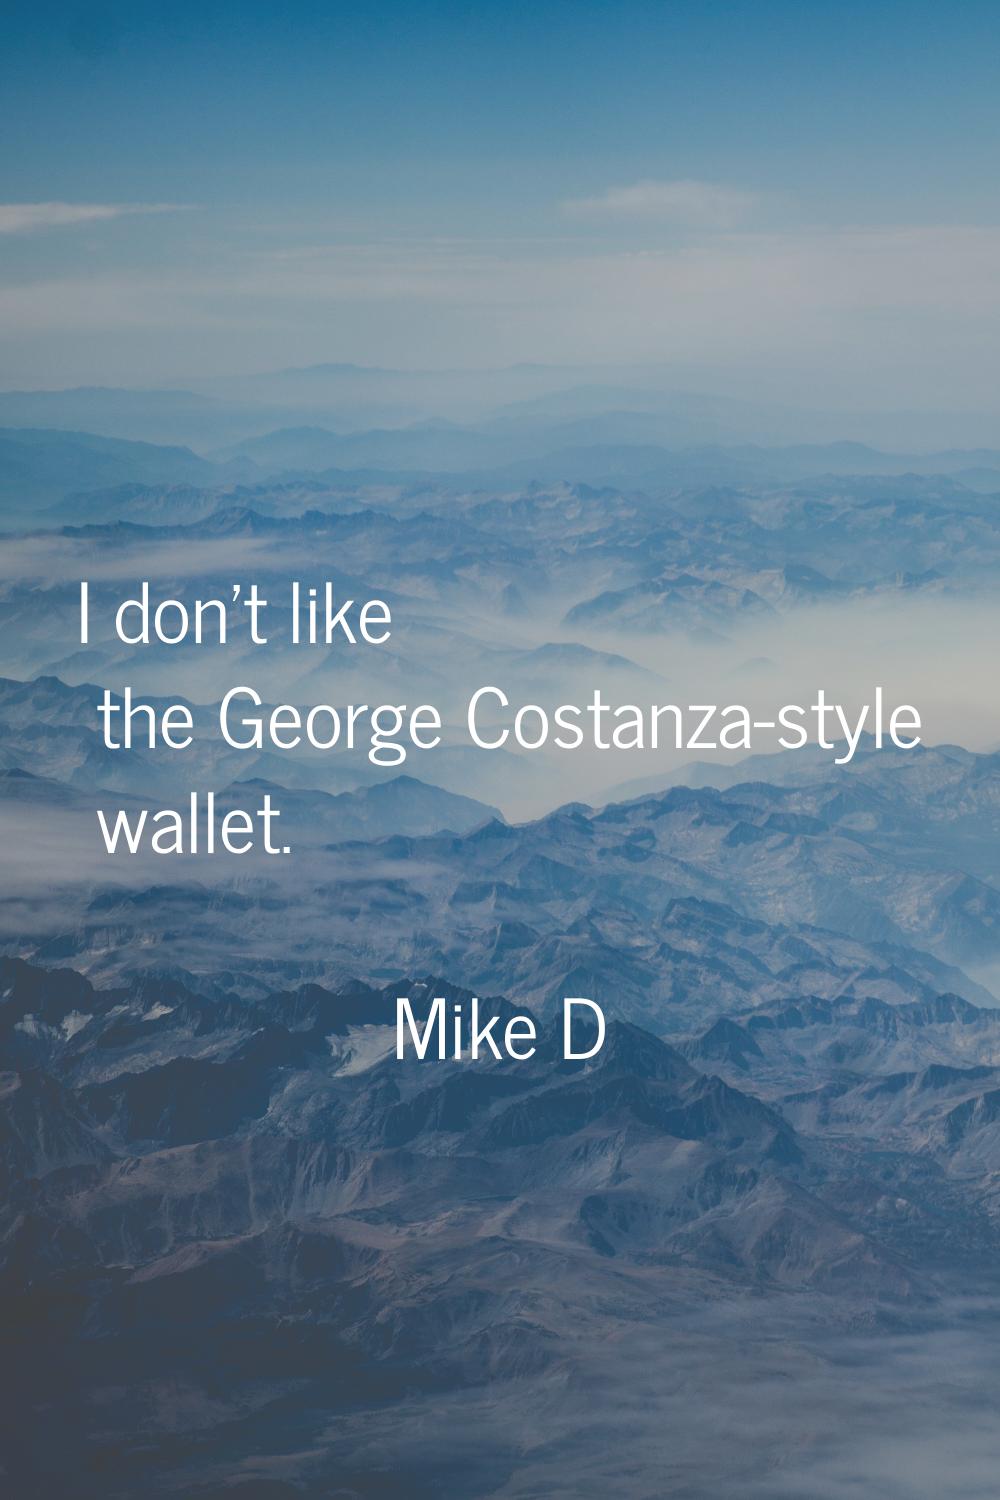 I don't like the George Costanza-style wallet.